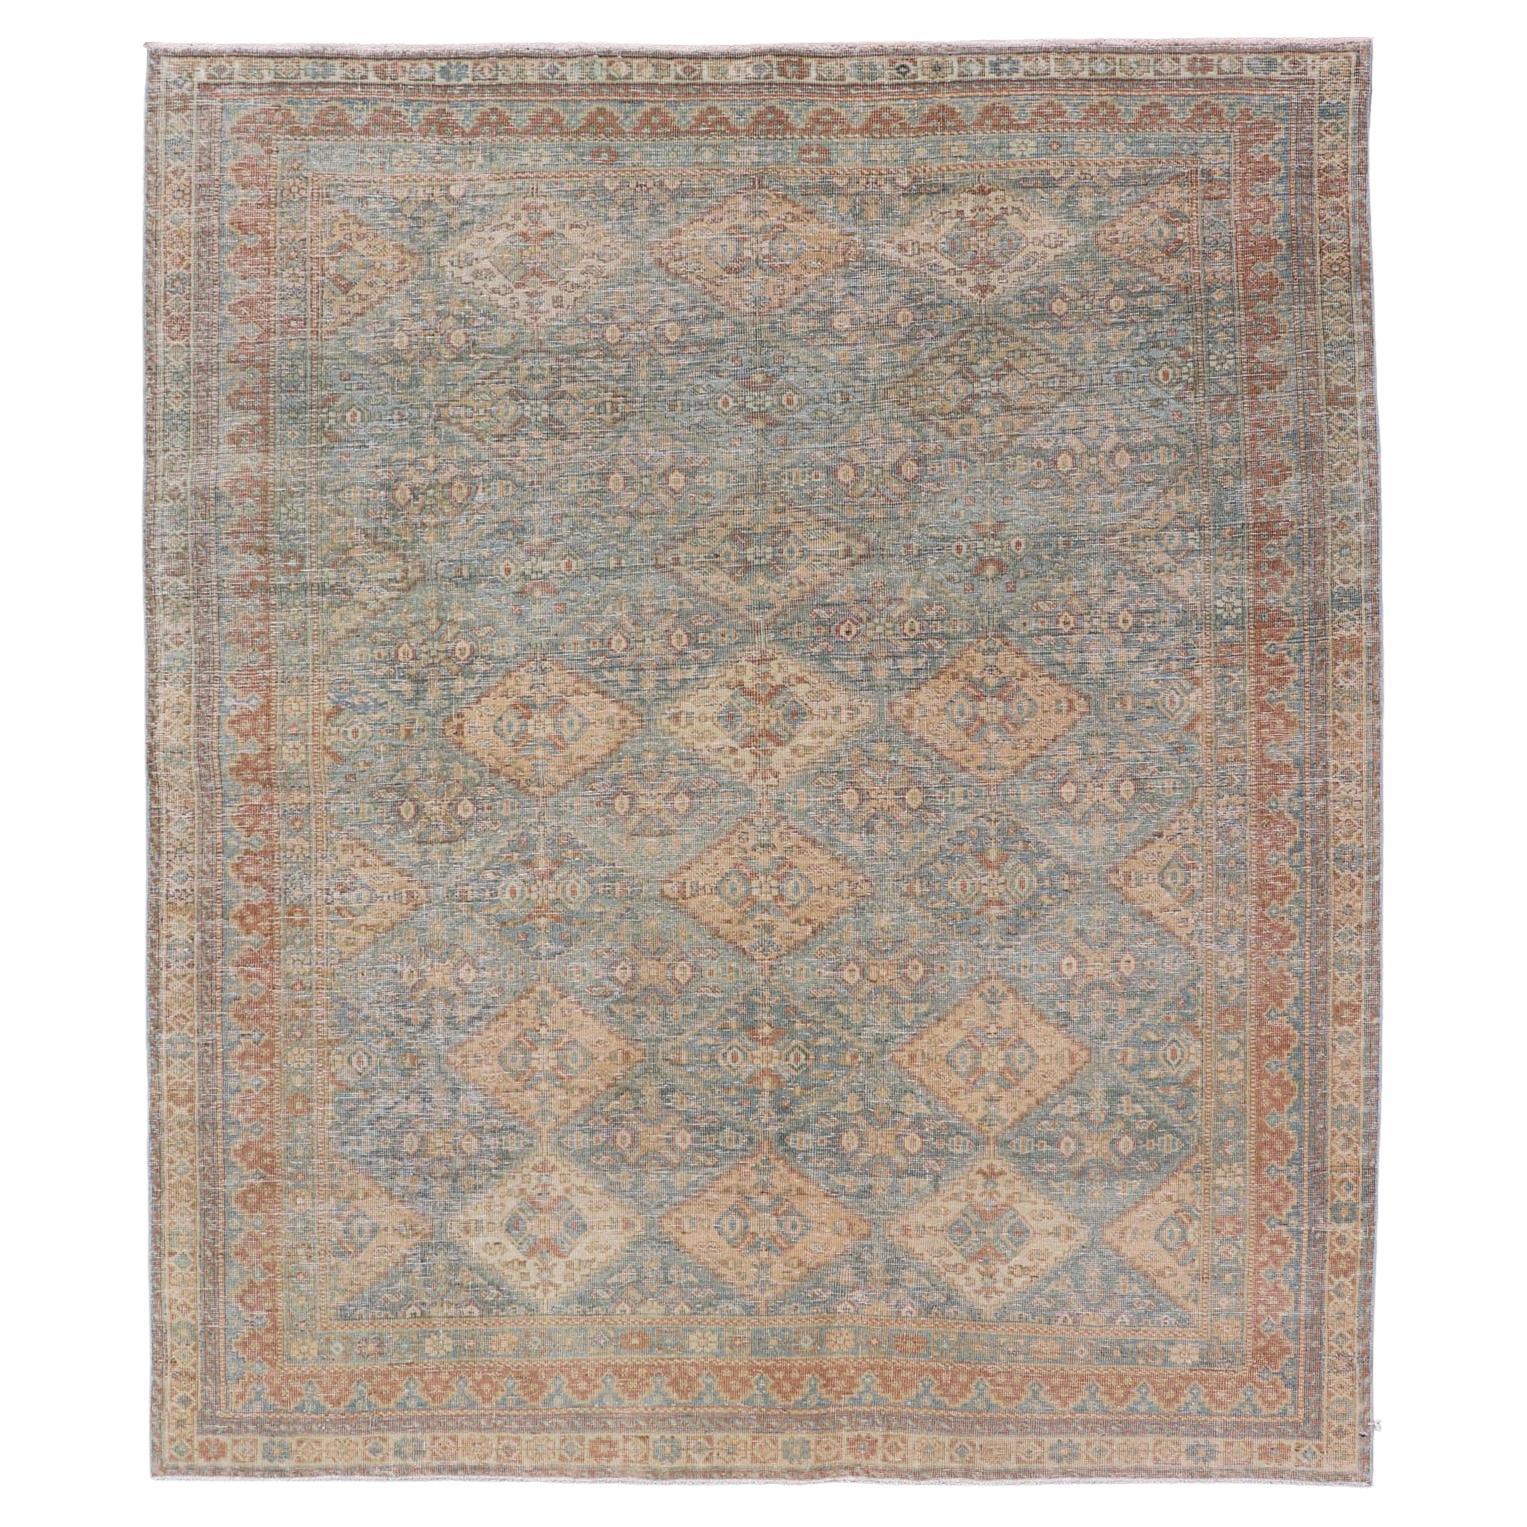 Antique Persian Tabriz Rug in Wool with Diamond Design in Blue, Apricot & Gray For Sale